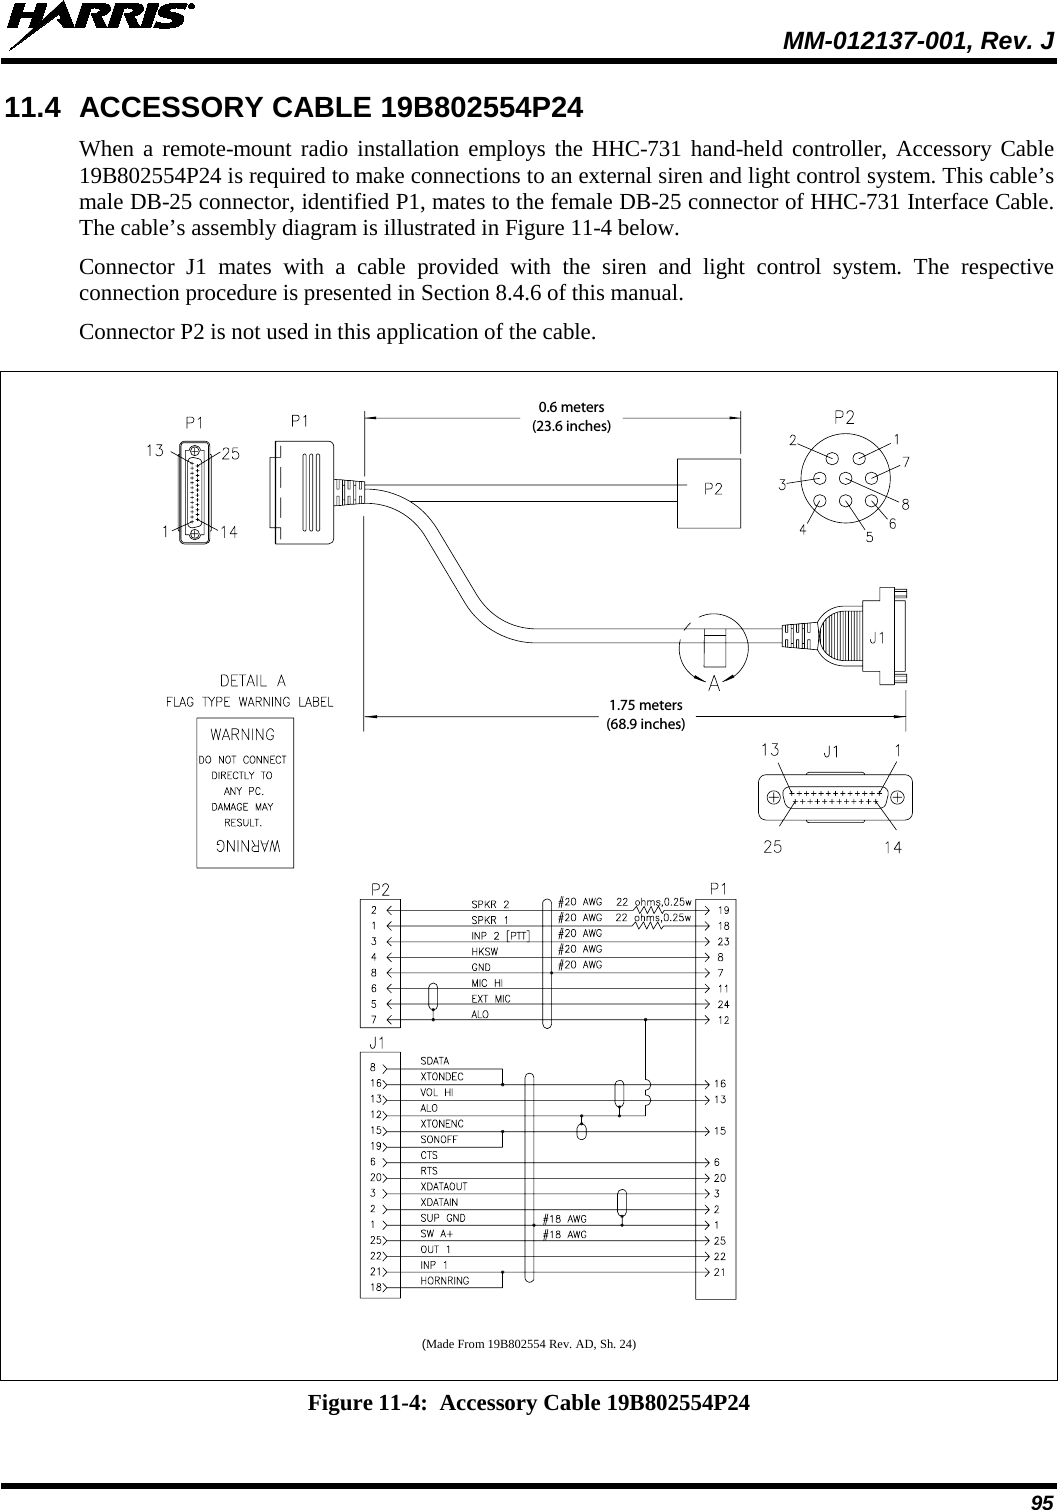  MM-012137-001, Rev. J 95 11.4 ACCESSORY CABLE 19B802554P24 When a remote-mount radio installation employs the HHC-731 hand-held controller, Accessory Cable 19B802554P24 is required to make connections to an external siren and light control system. This cable’s male DB-25 connector, identified P1, mates to the female DB-25 connector of HHC-731 Interface Cable. The cable’s assembly diagram is illustrated in Figure 11-4 below. Connector J1 mates with a cable provided with the siren and light control system. The respective connection procedure is presented in Section 8.4.6 of this manual. Connector P2 is not used in this application of the cable.    (Made From 19B802554 Rev. AD, Sh. 24)  Figure 11-4:  Accessory Cable 19B802554P24  0.6 meters(23.6 inches)1.75 meters(68.9 inches)